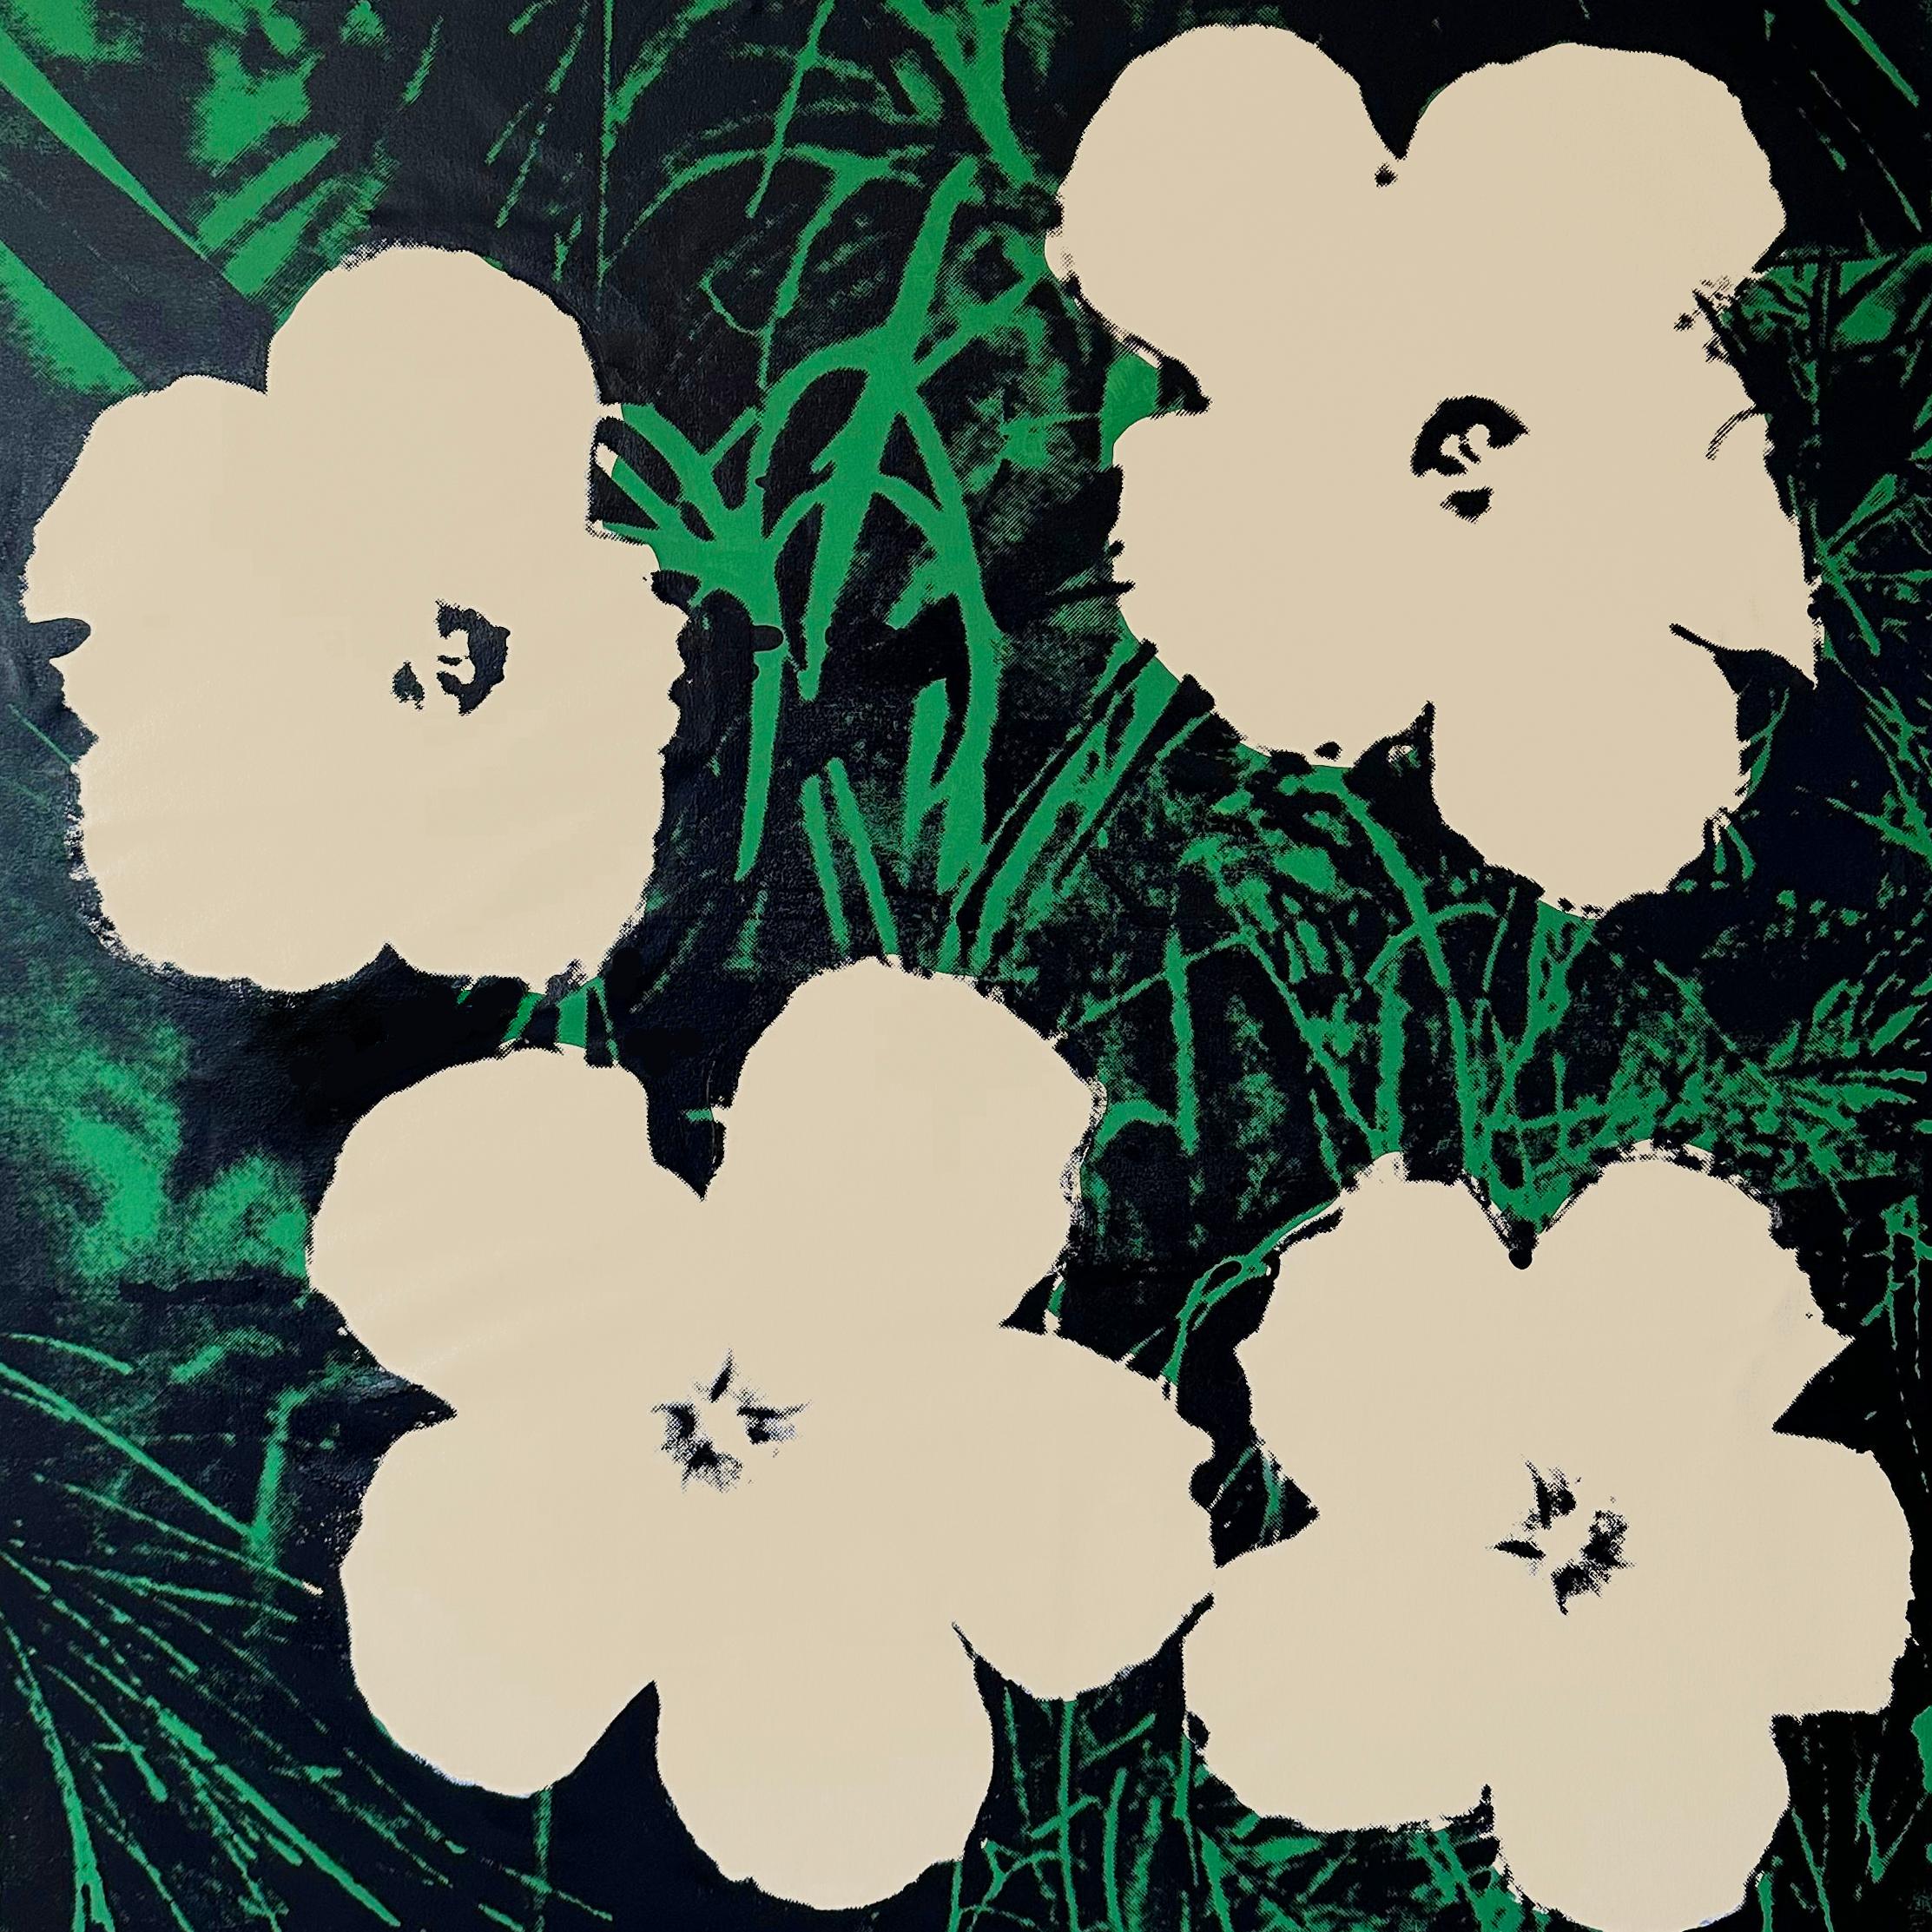 Denied Warhol Flowers, (cream/white) Silkscreen Painting by Charles Lutz
Silkscreen and acrylic on canvas with Denied stamp of the Andy Warhol Art Authentication Board.
48 x 48" inches
2008

Lutz's 2007 ''Warhol Denied'' series gained international